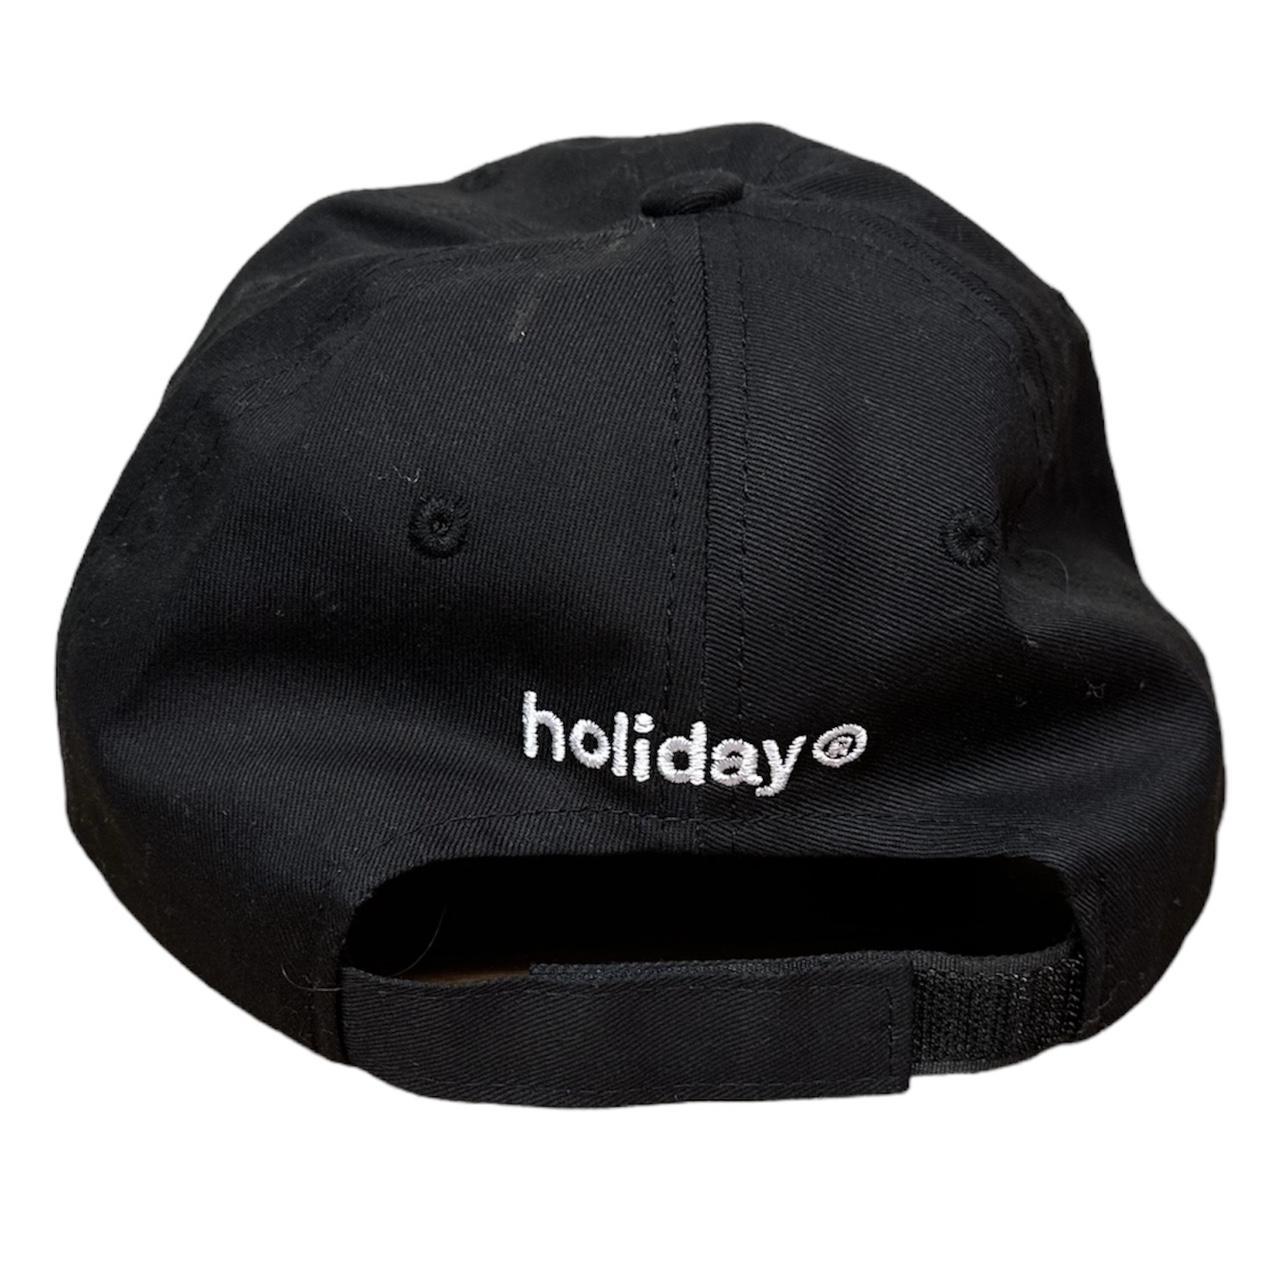 Holiday The Label Men's Black and White Hat (3)